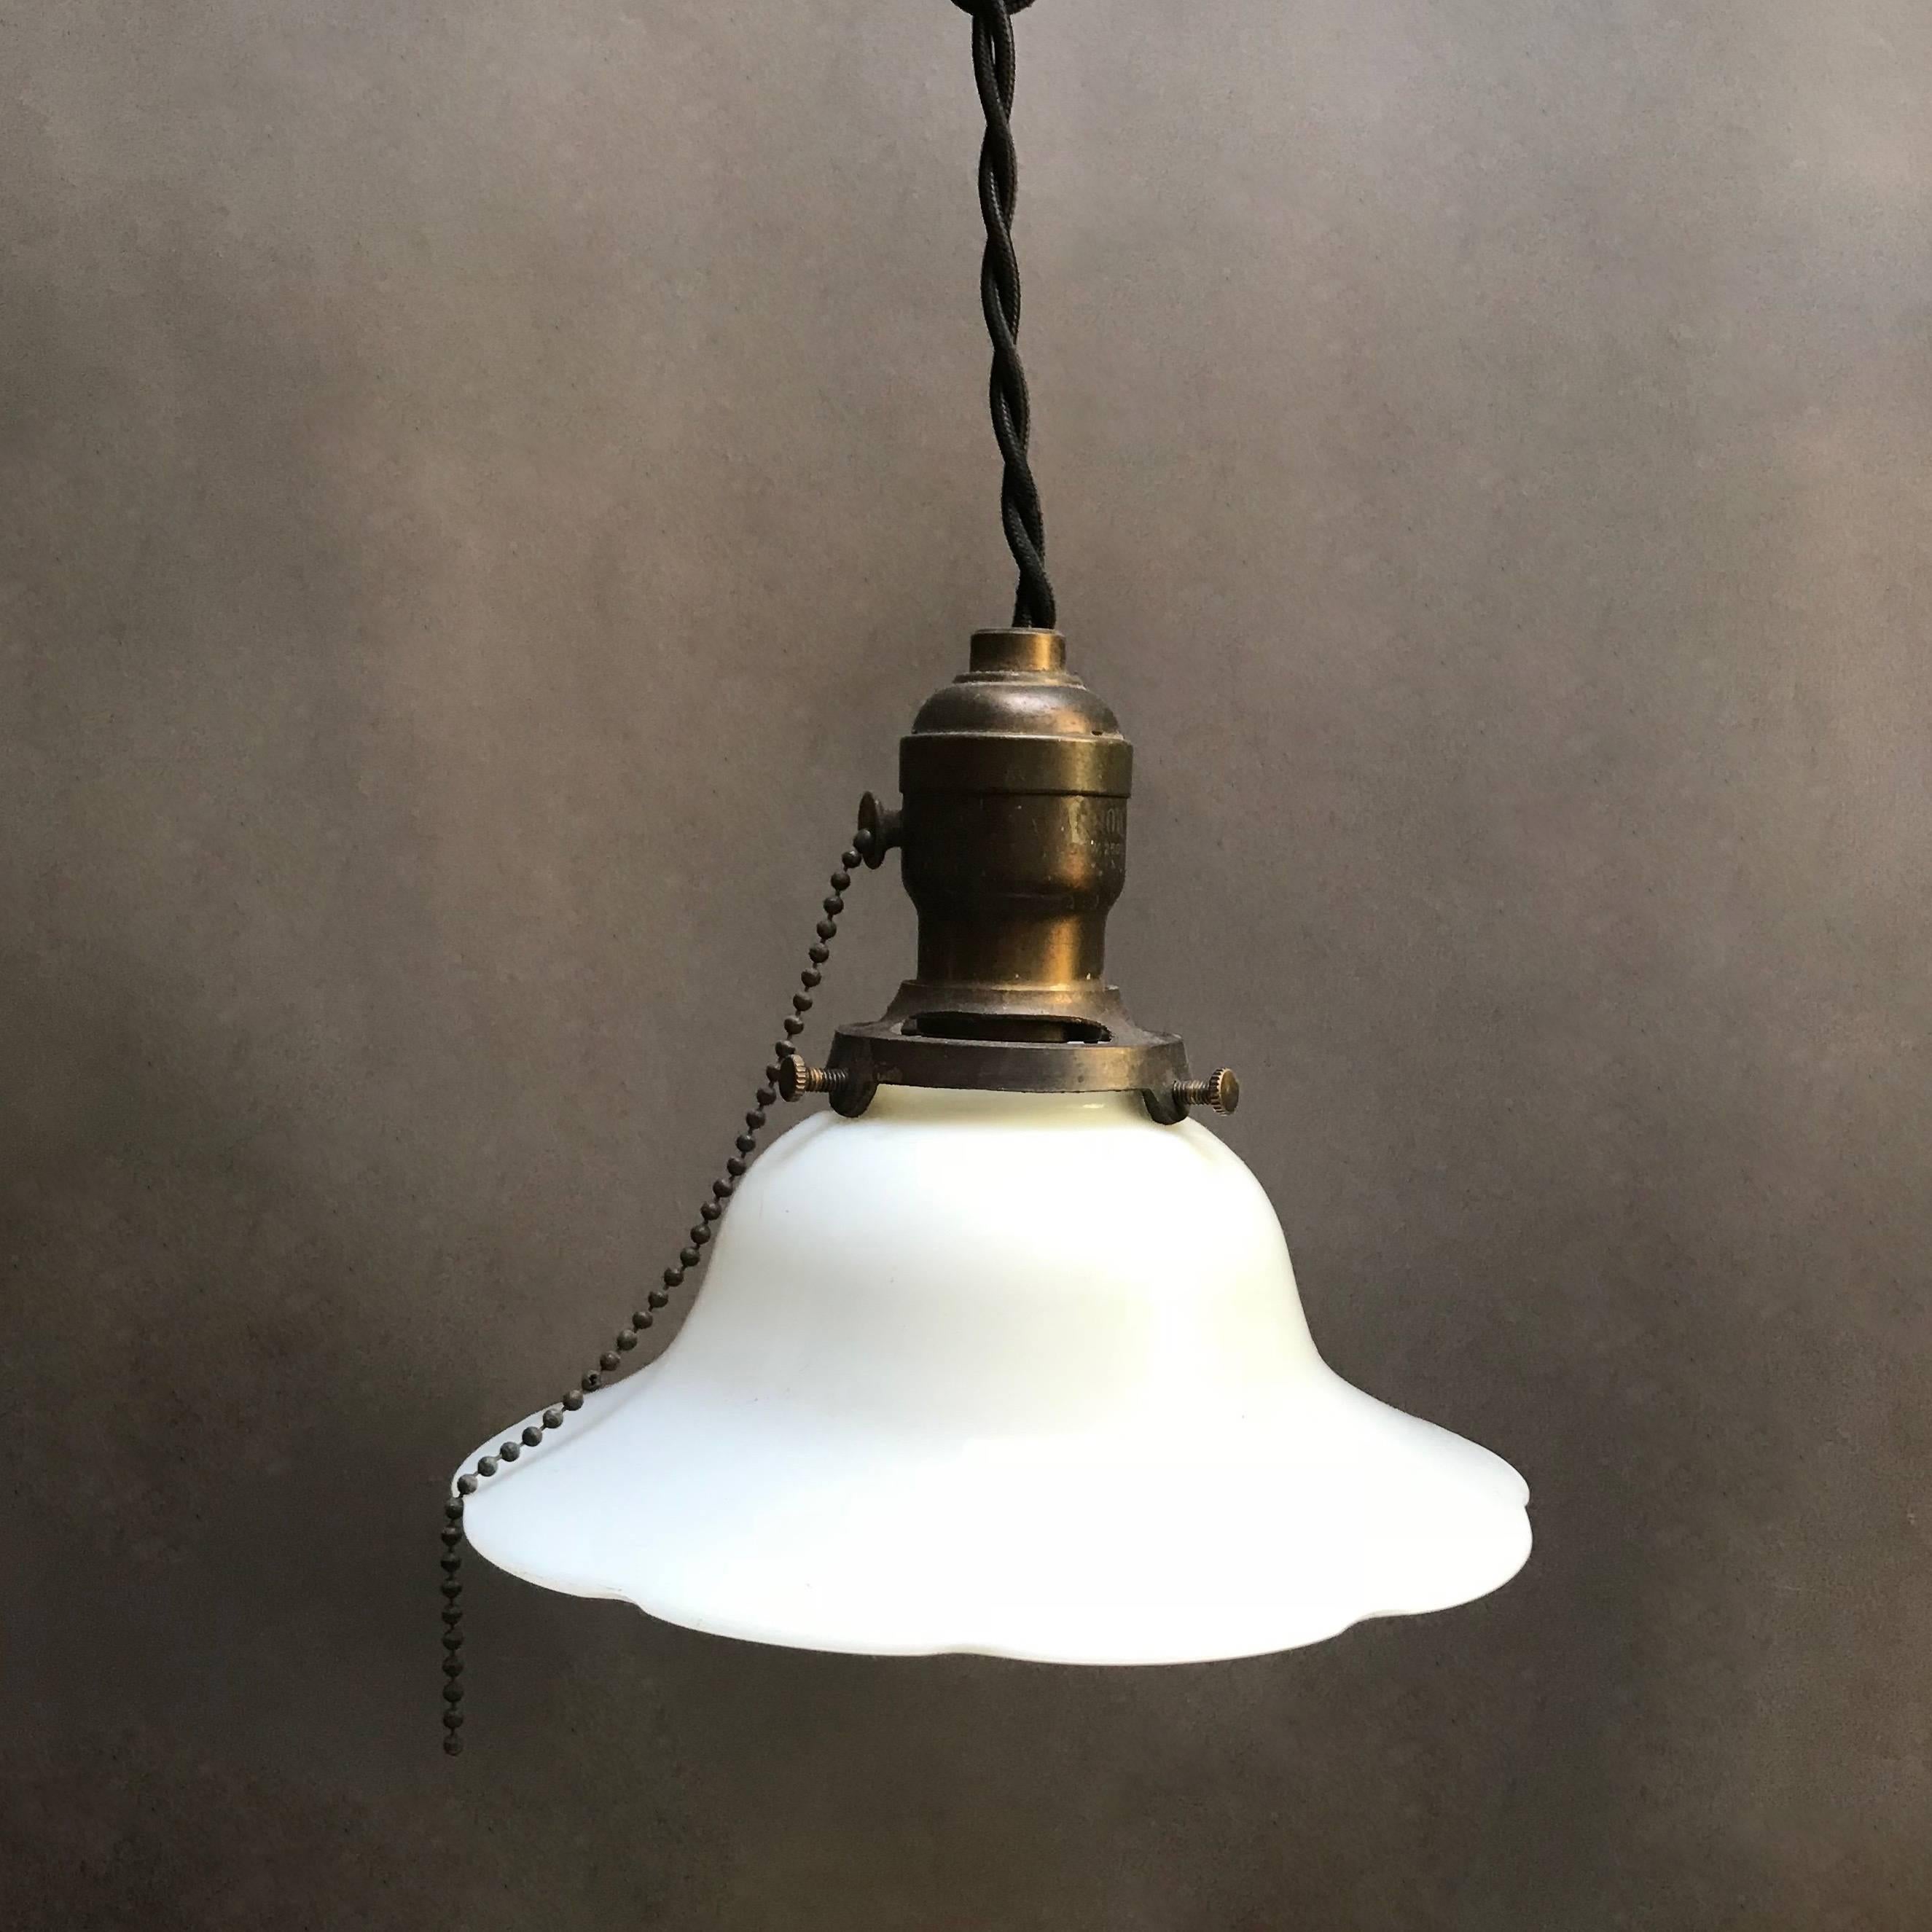 Industrial pendant light features a milk glass, bell shape shade with scalloped edge with brass pull chain fitter is newly wired with 48 inches of braided black cloth cord to accept a 150 watt bulb.